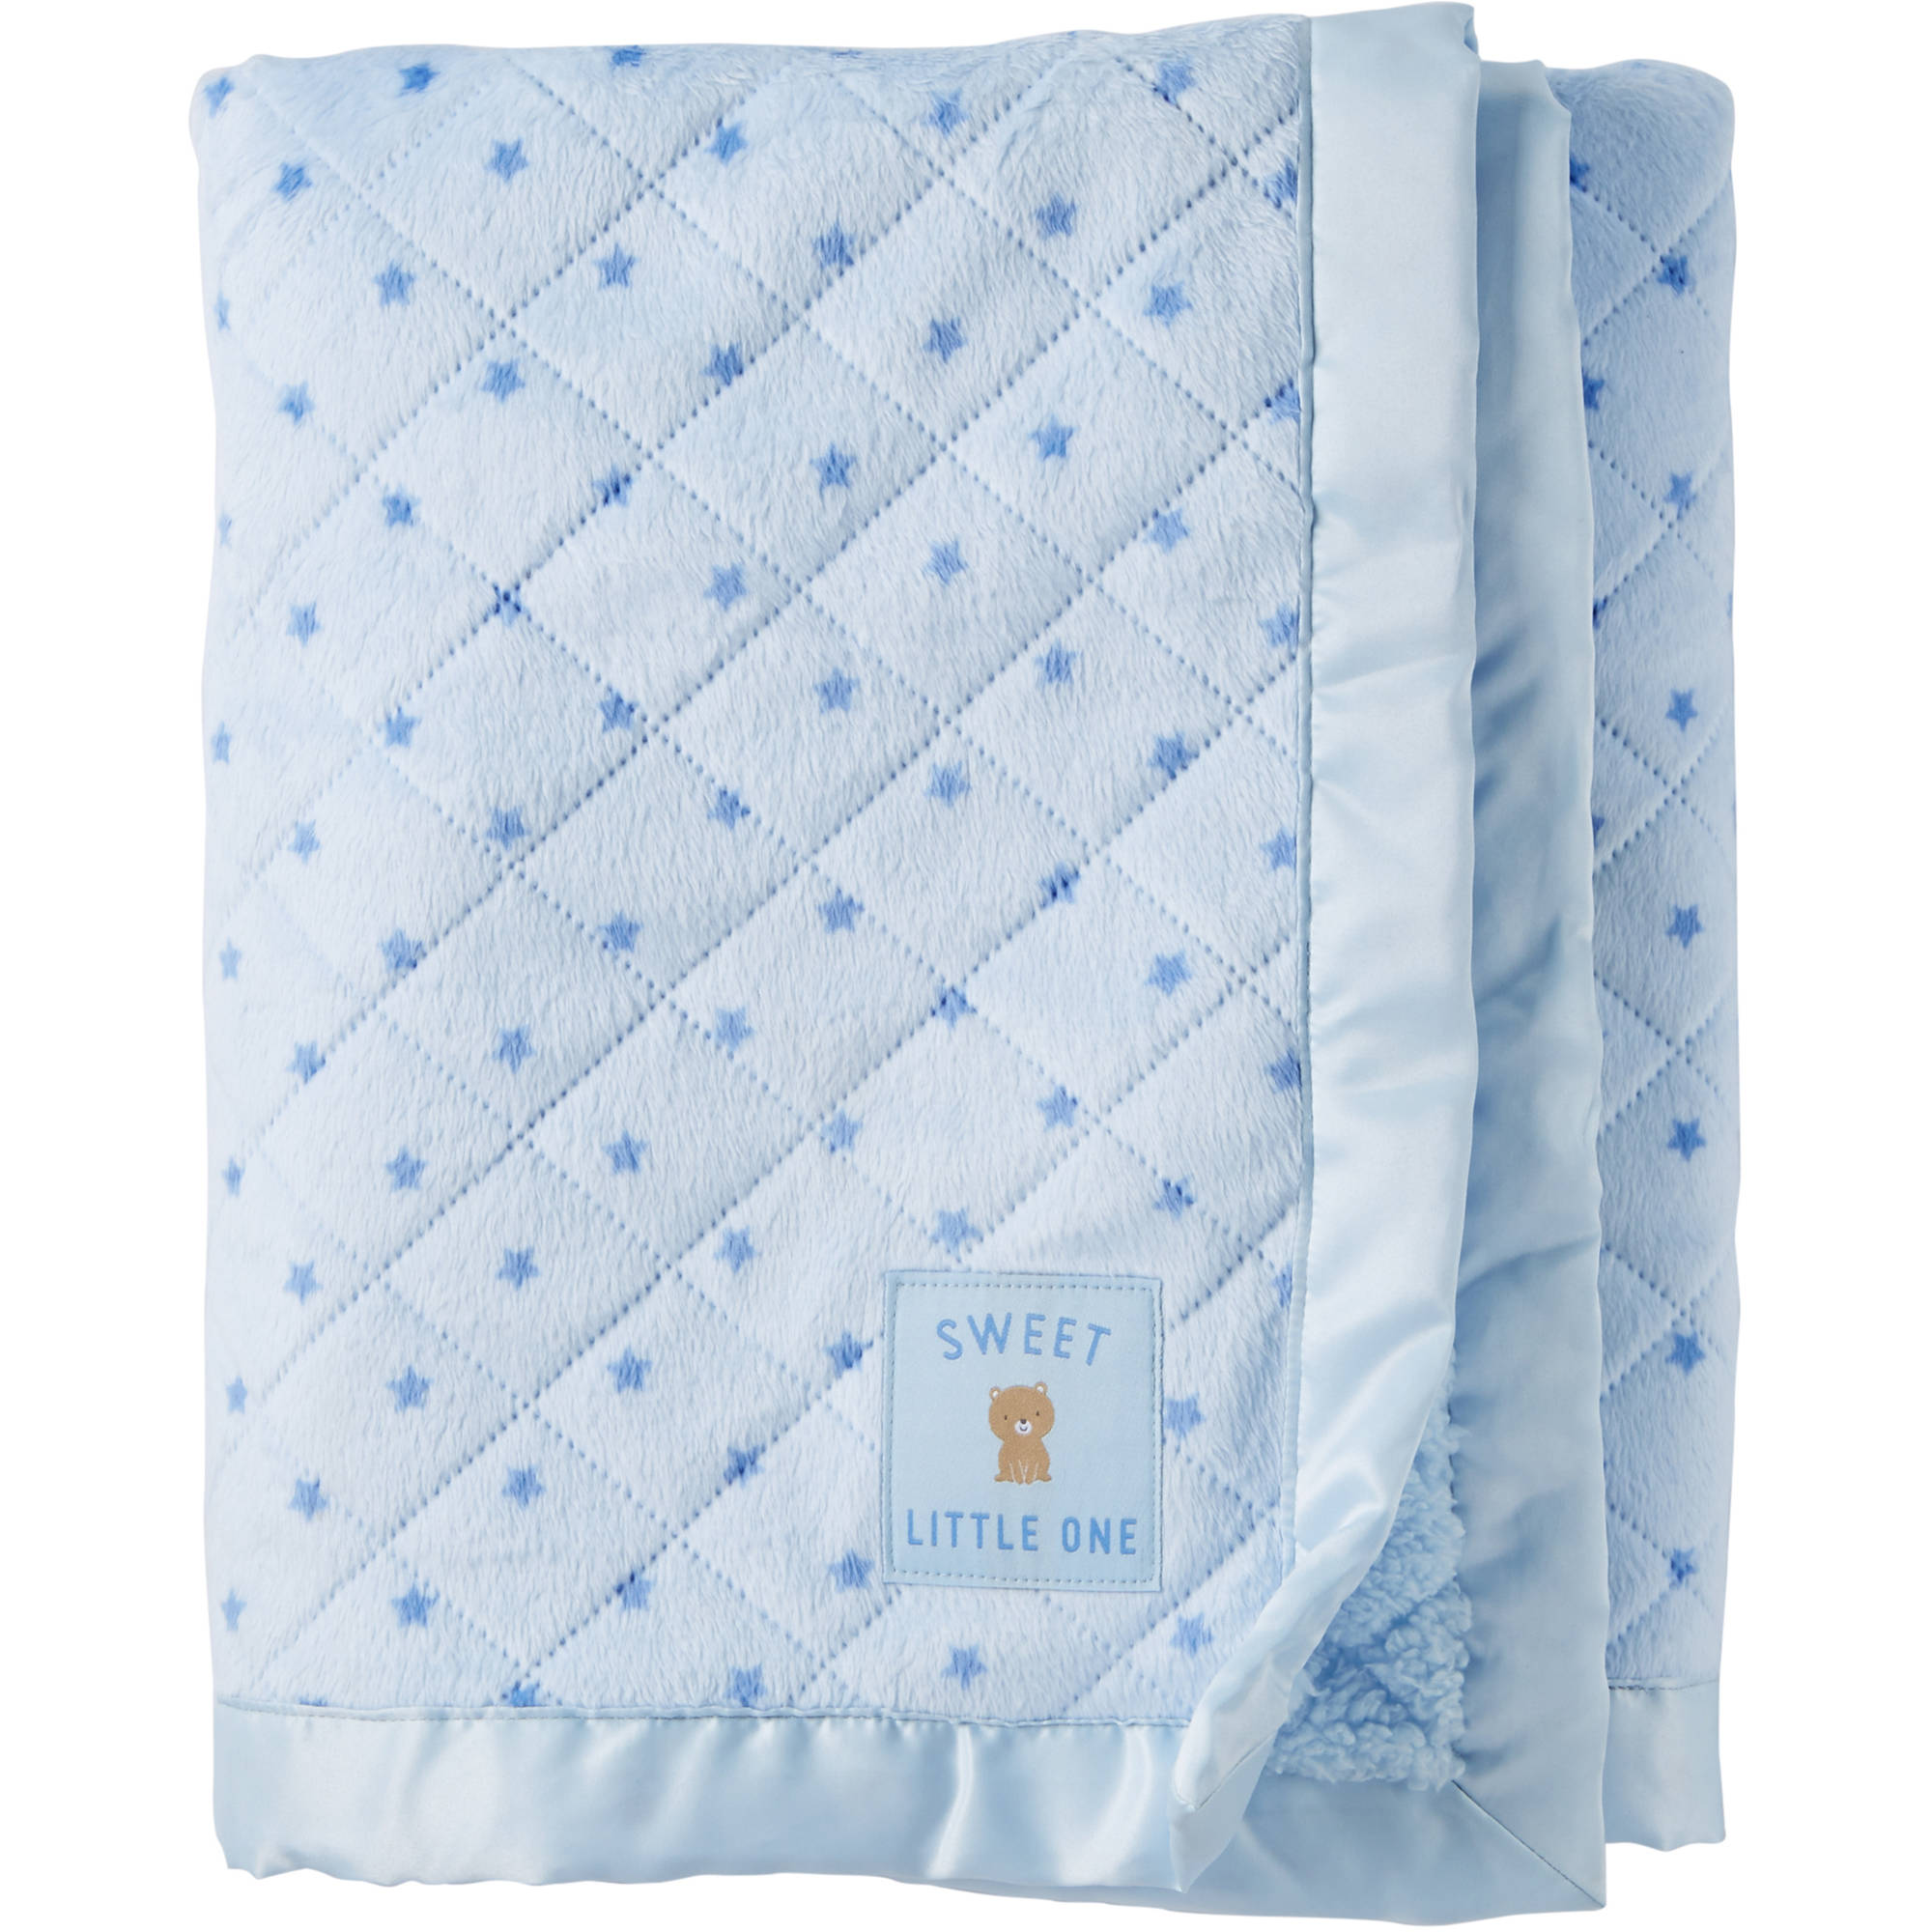 Child of Mine Newborn Quilted Baby Blanket, Blue - image 1 of 1